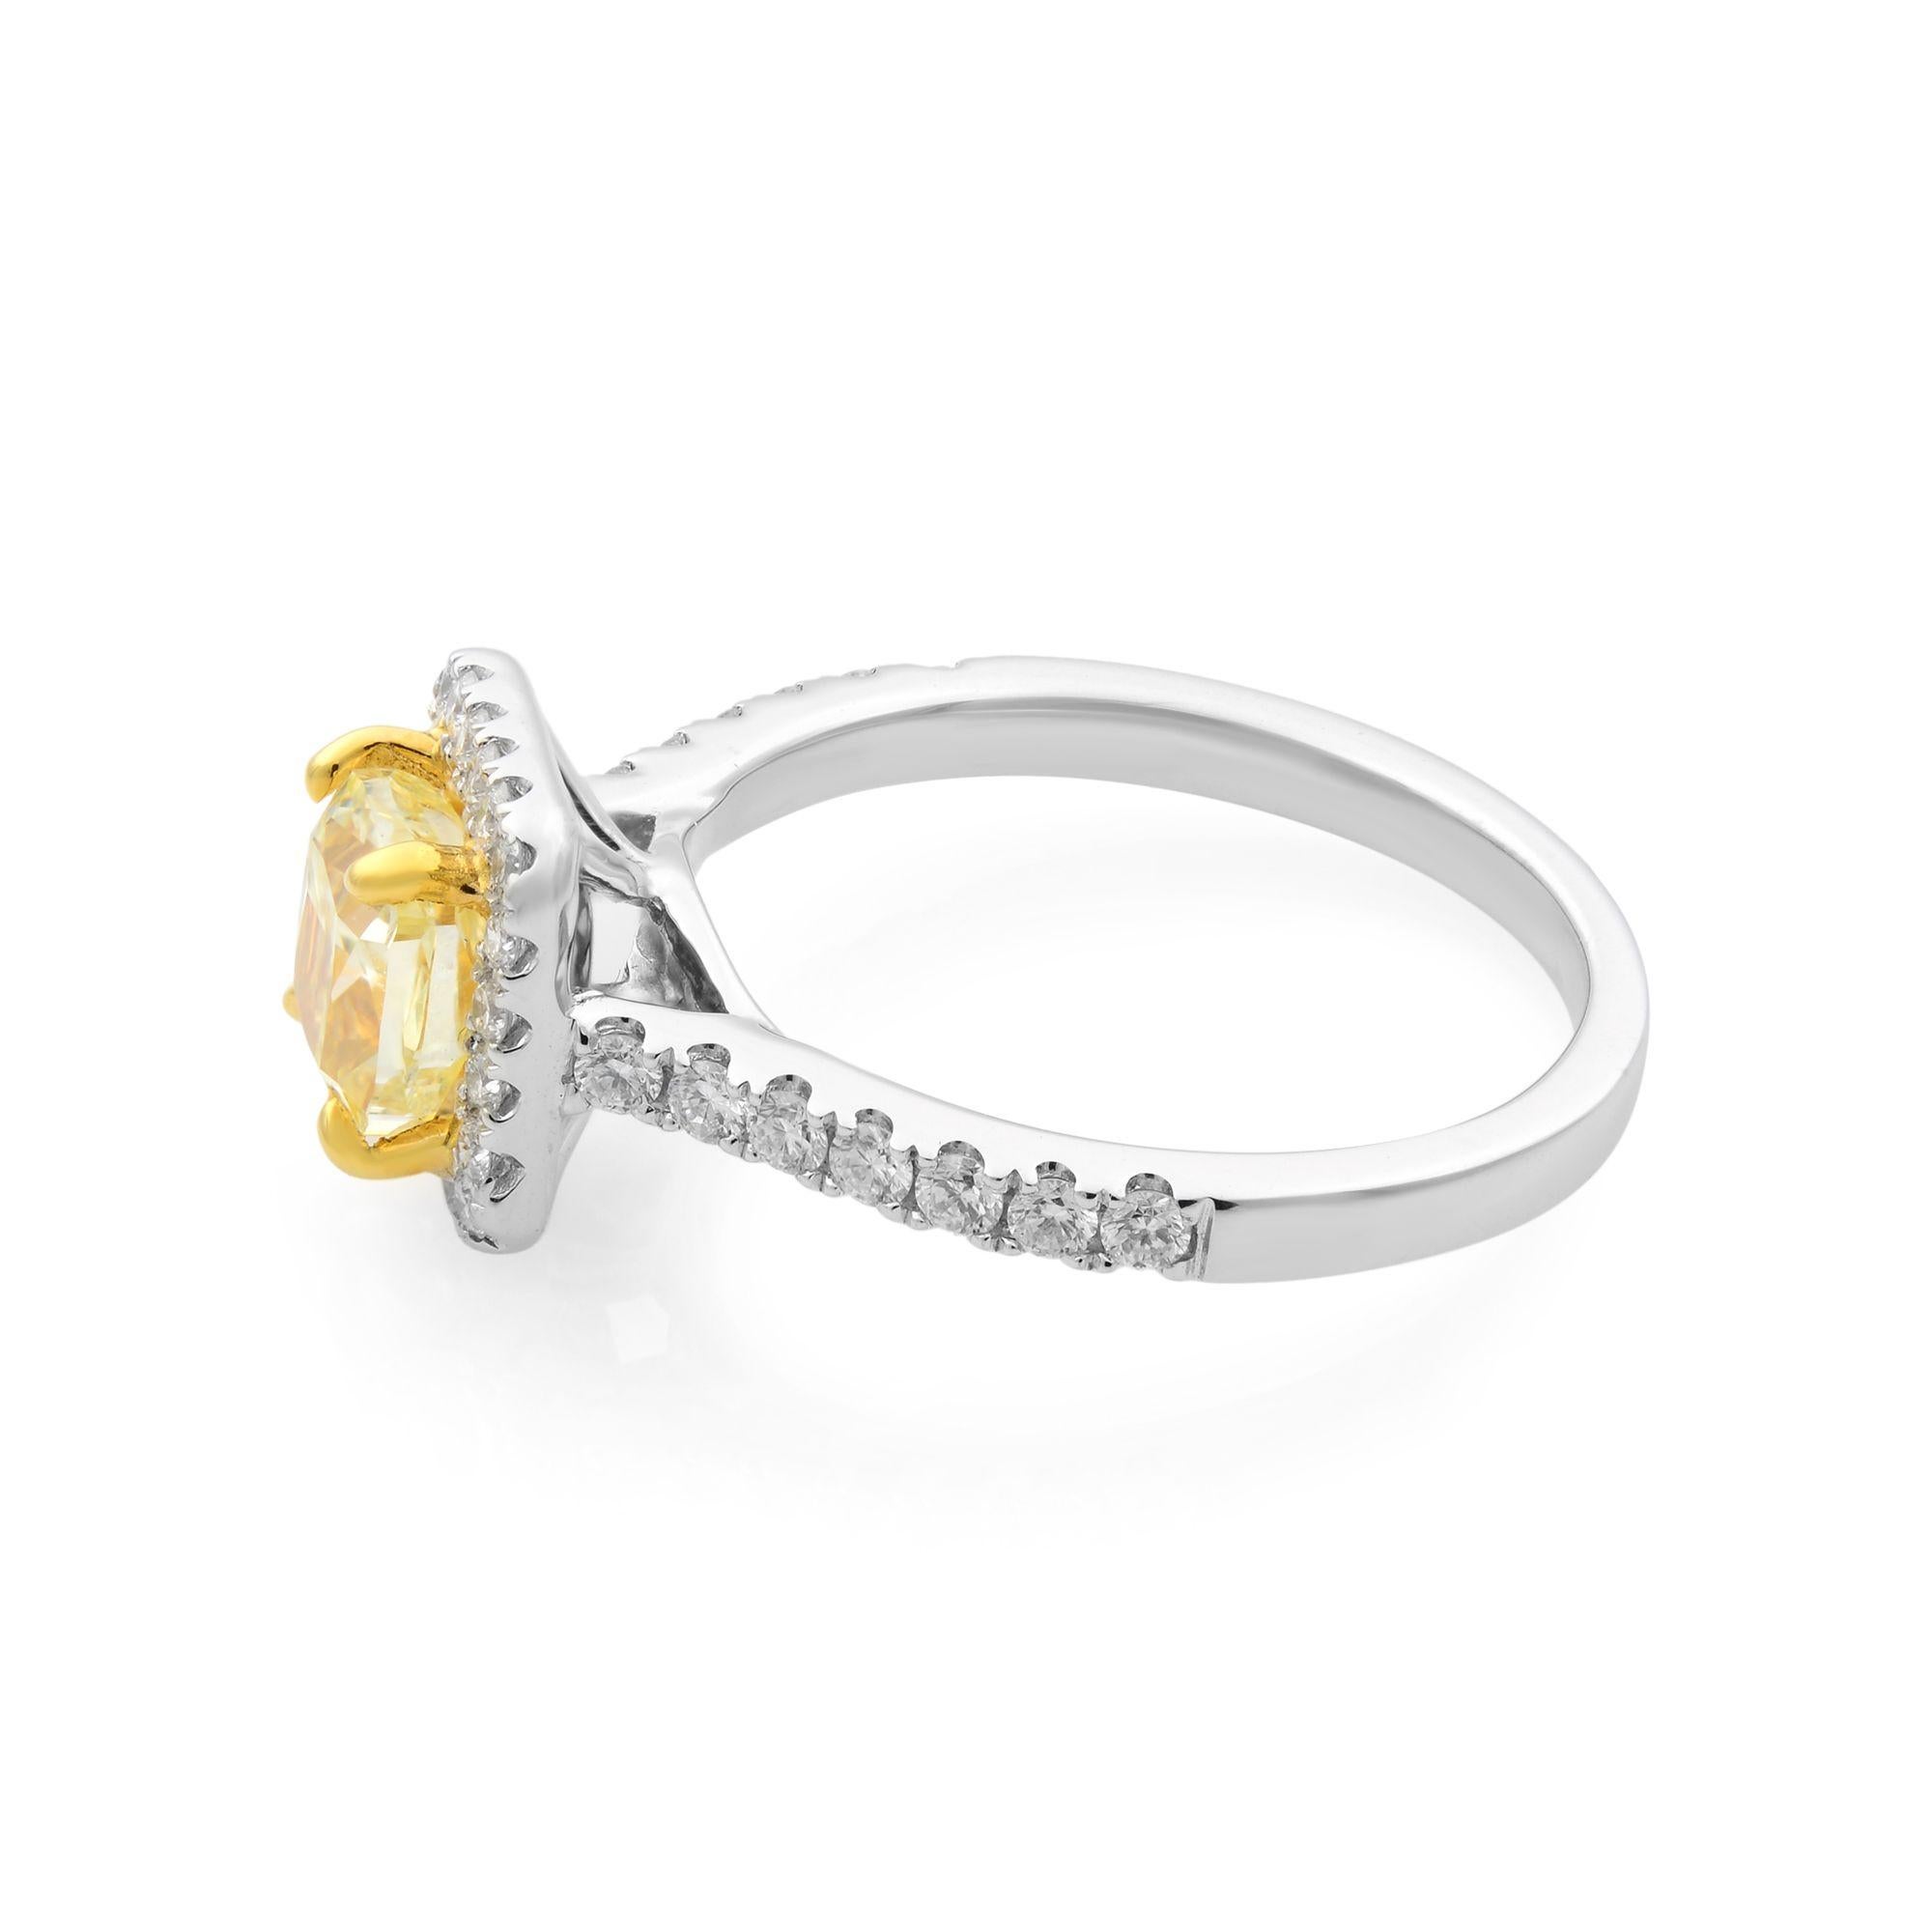 This cushion cut diamond is a vivid fancy yellow that radiates bright light and sparkles like the sun. The center stone is surrounded by a halo of prong set white diamonds, the elongated cushion cut stone is accented exquisitely. The bright, prong